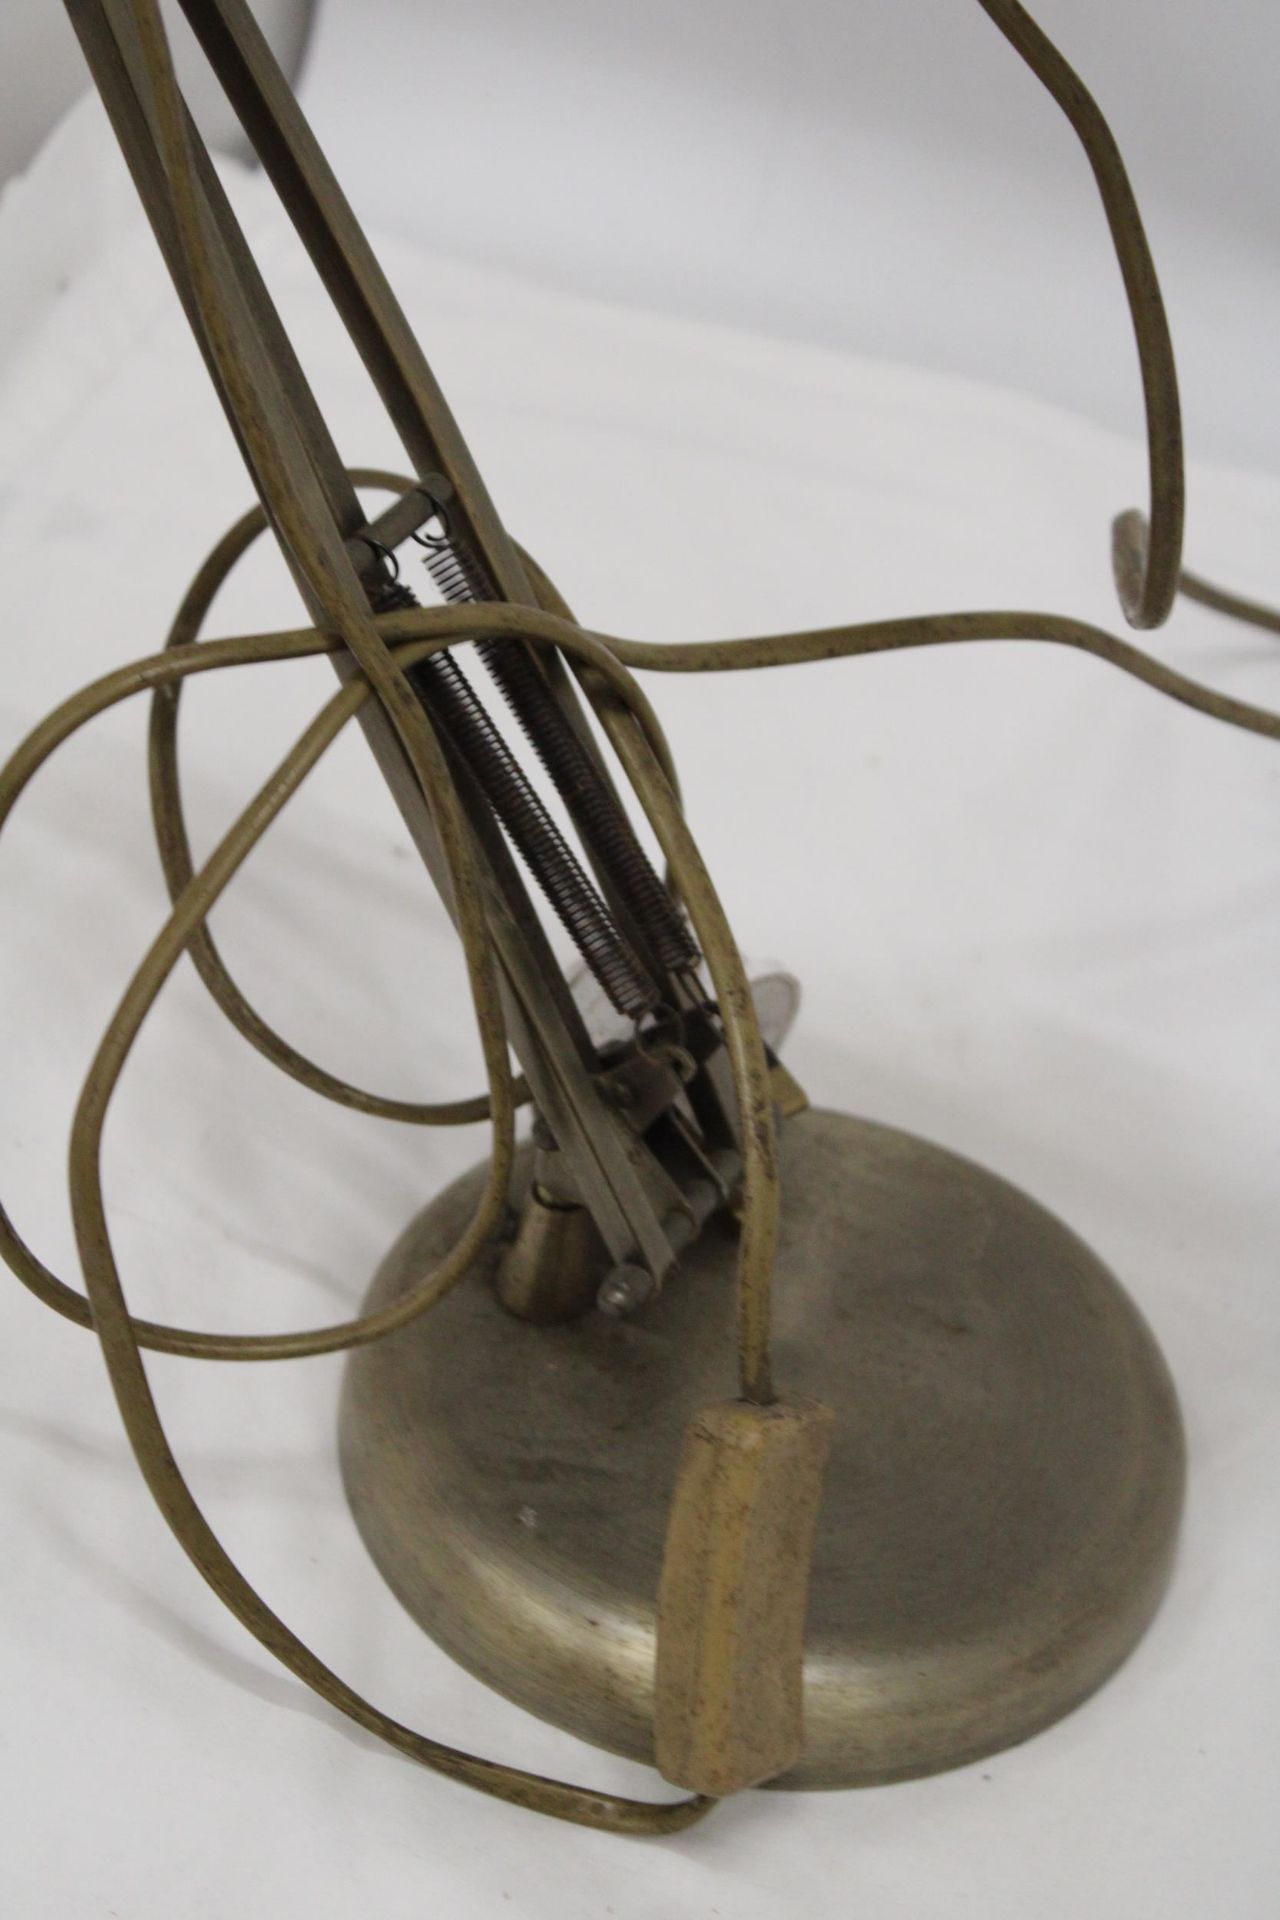 A VINTAGE METAL ANGLEPOISE LAMP - Image 4 of 6